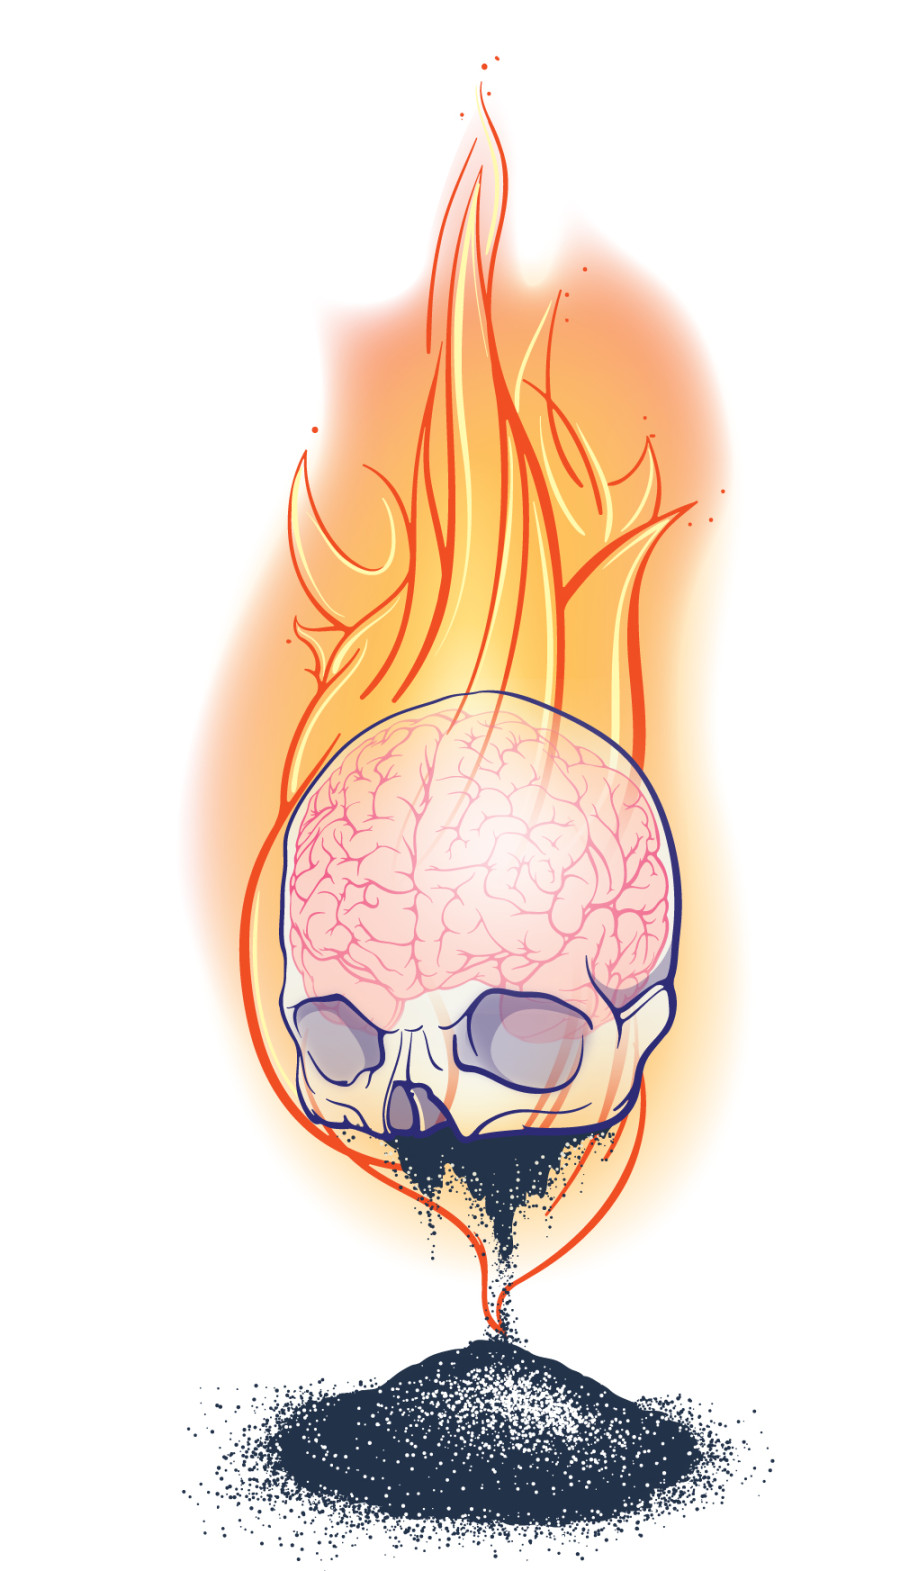 In progress color illustration of a skull on fire. Brain is visible. Pile of ashes lies beneath skull.